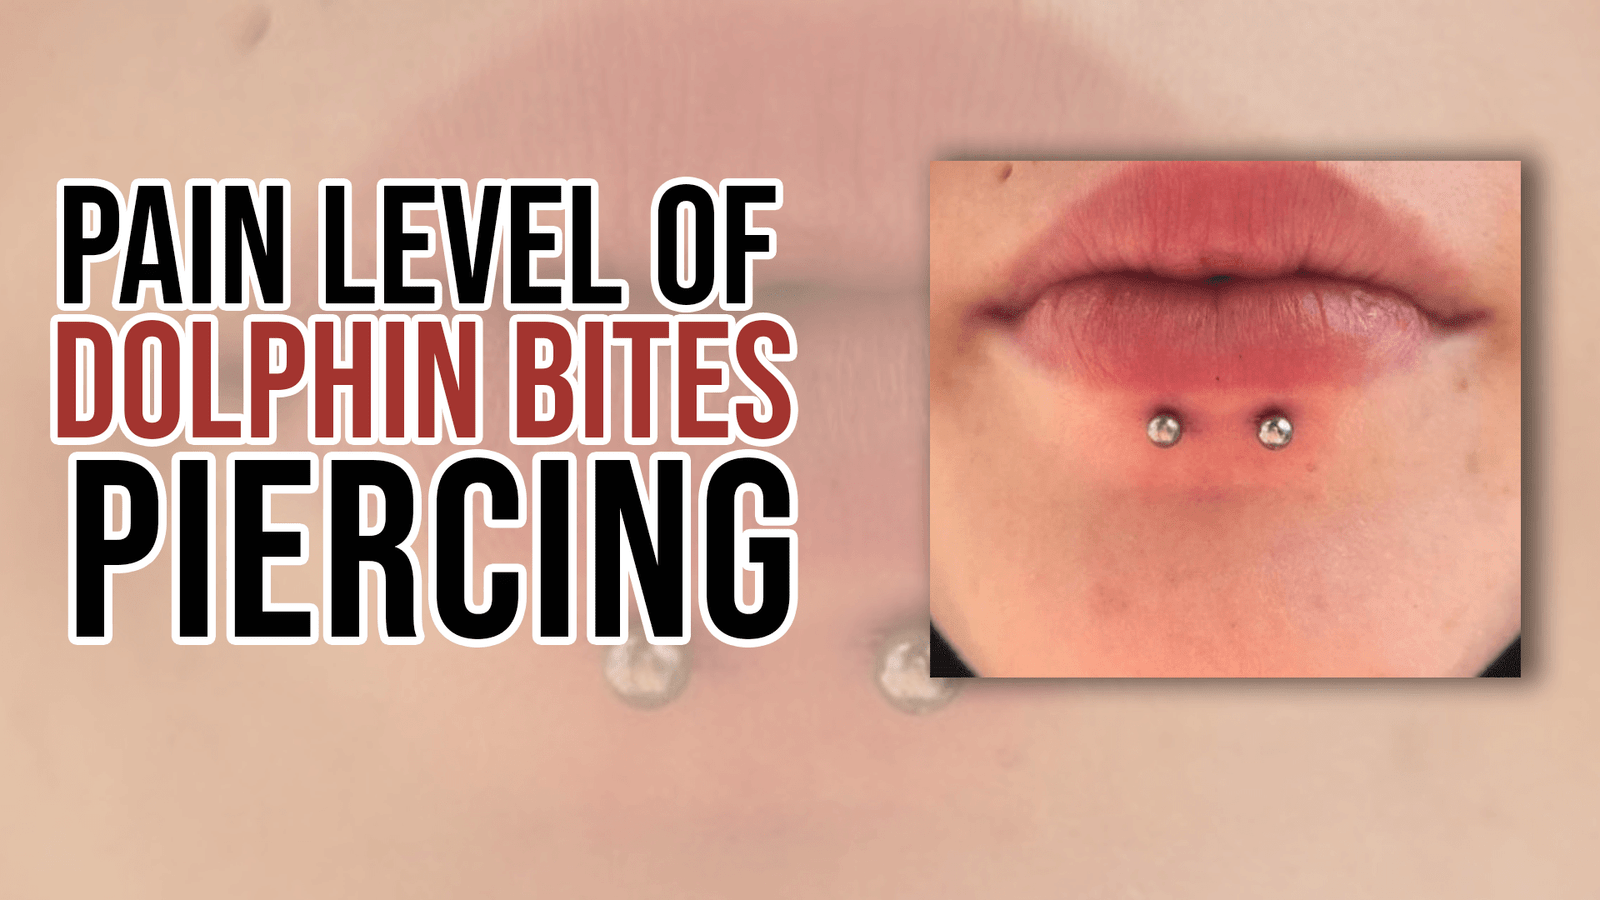 Pain Level of Dolphin Bites Piercing